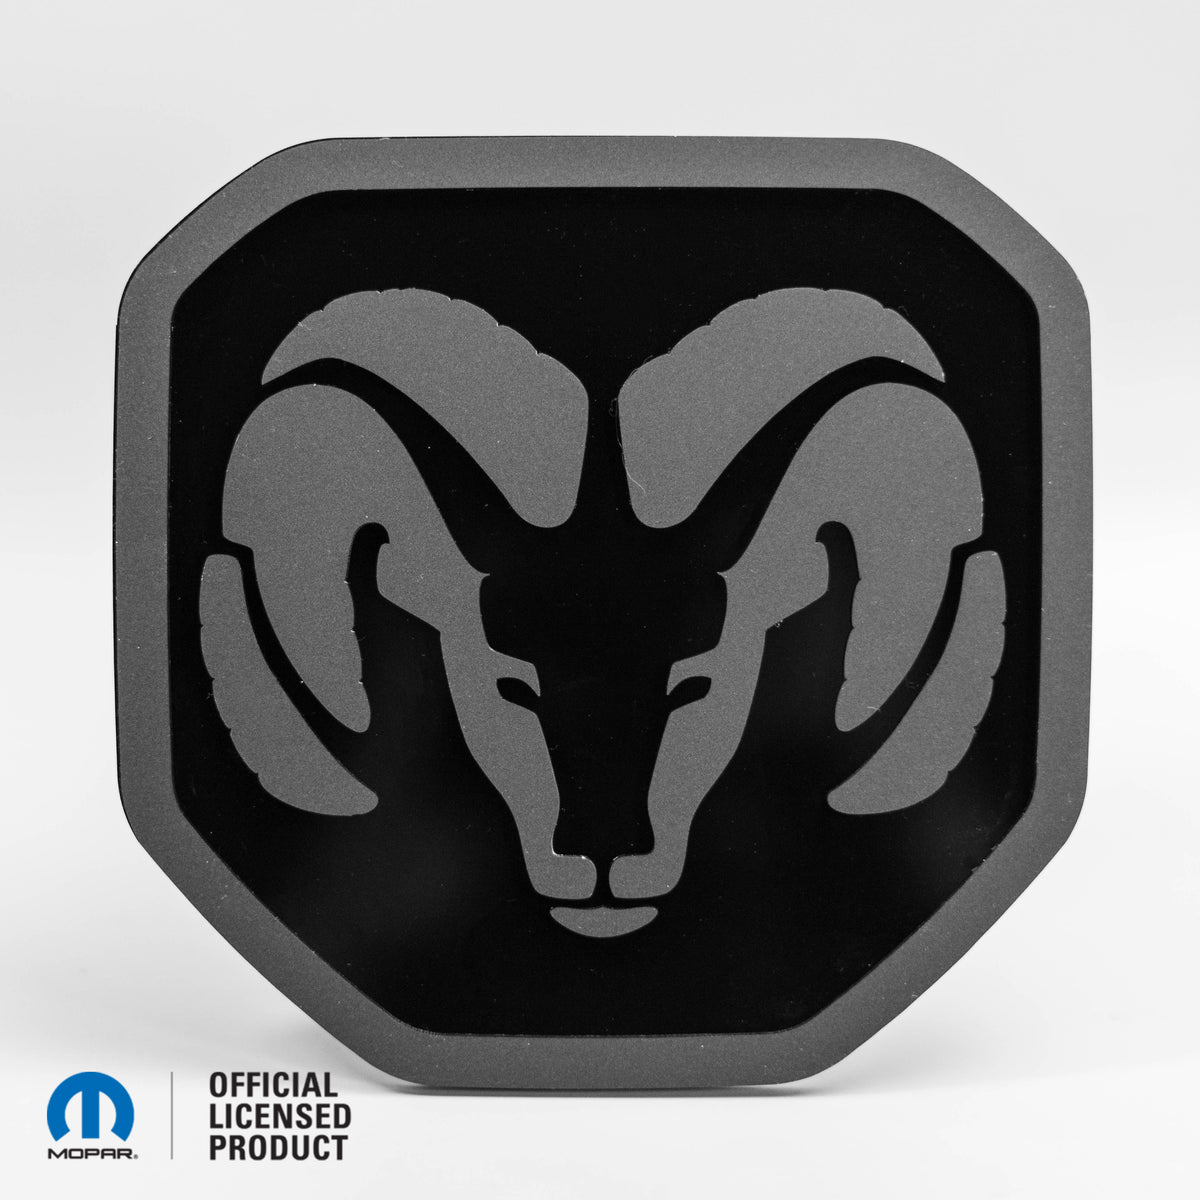 RAM® Head Logo Style 2 Tailgate Badge - Fits 2019+ RAM® Tailgate - 1500, 2500, 3500 - Matte on Gloss- Officially Licensed Product